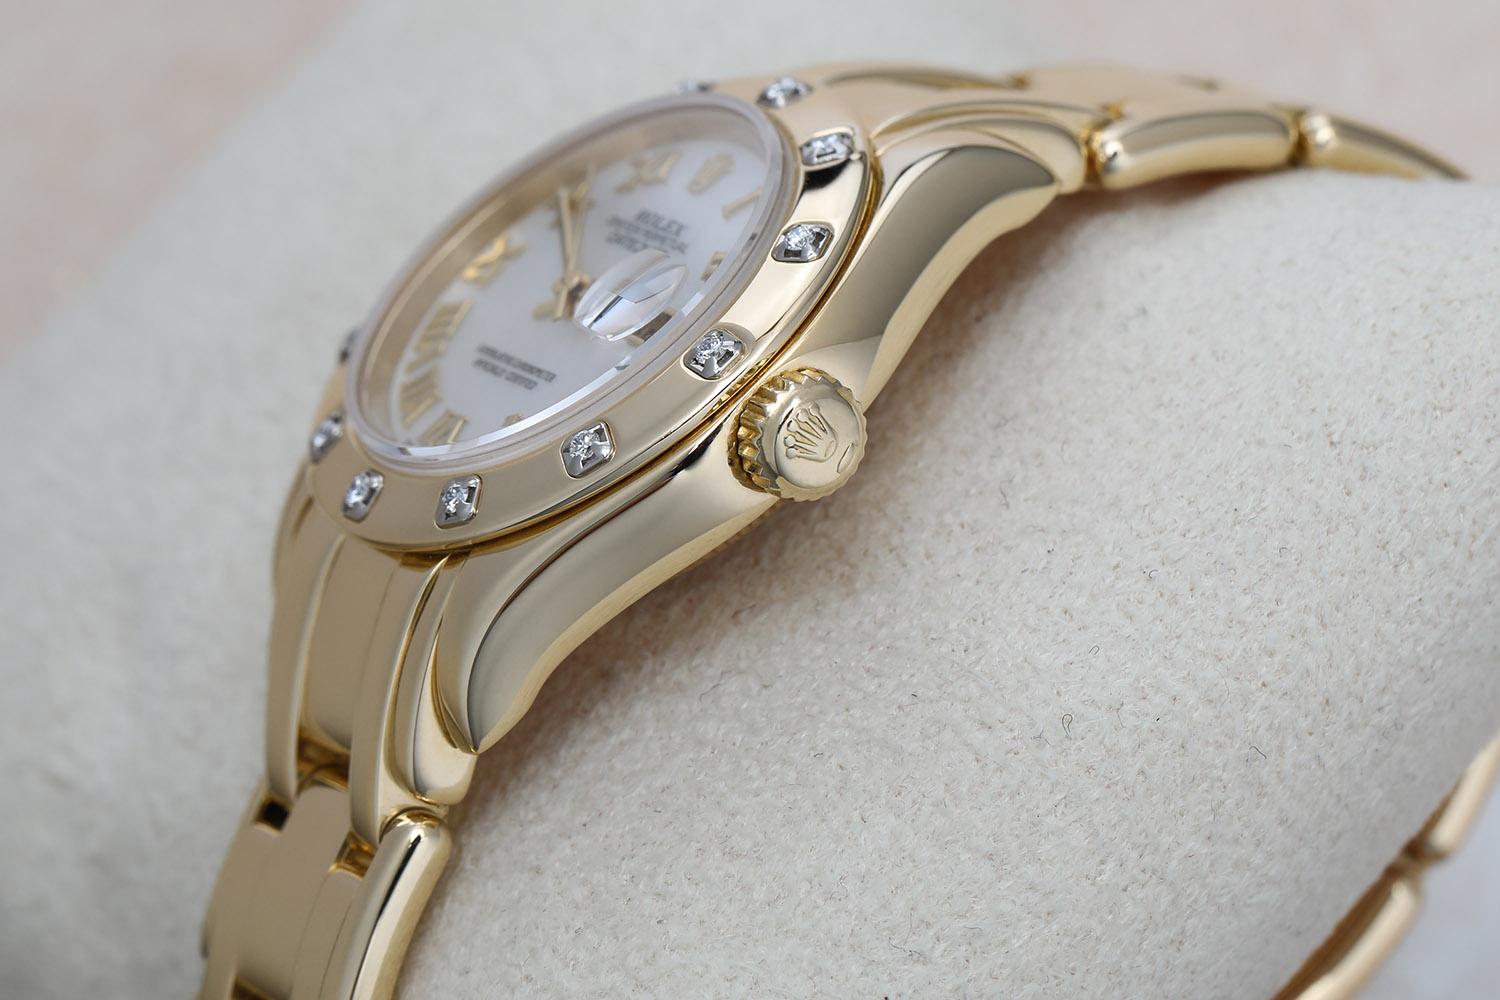 Rolex Pearlmaster 18k Yellow Gold Watch with White Mother of Pearl 80318 In Excellent Condition For Sale In New York, NY